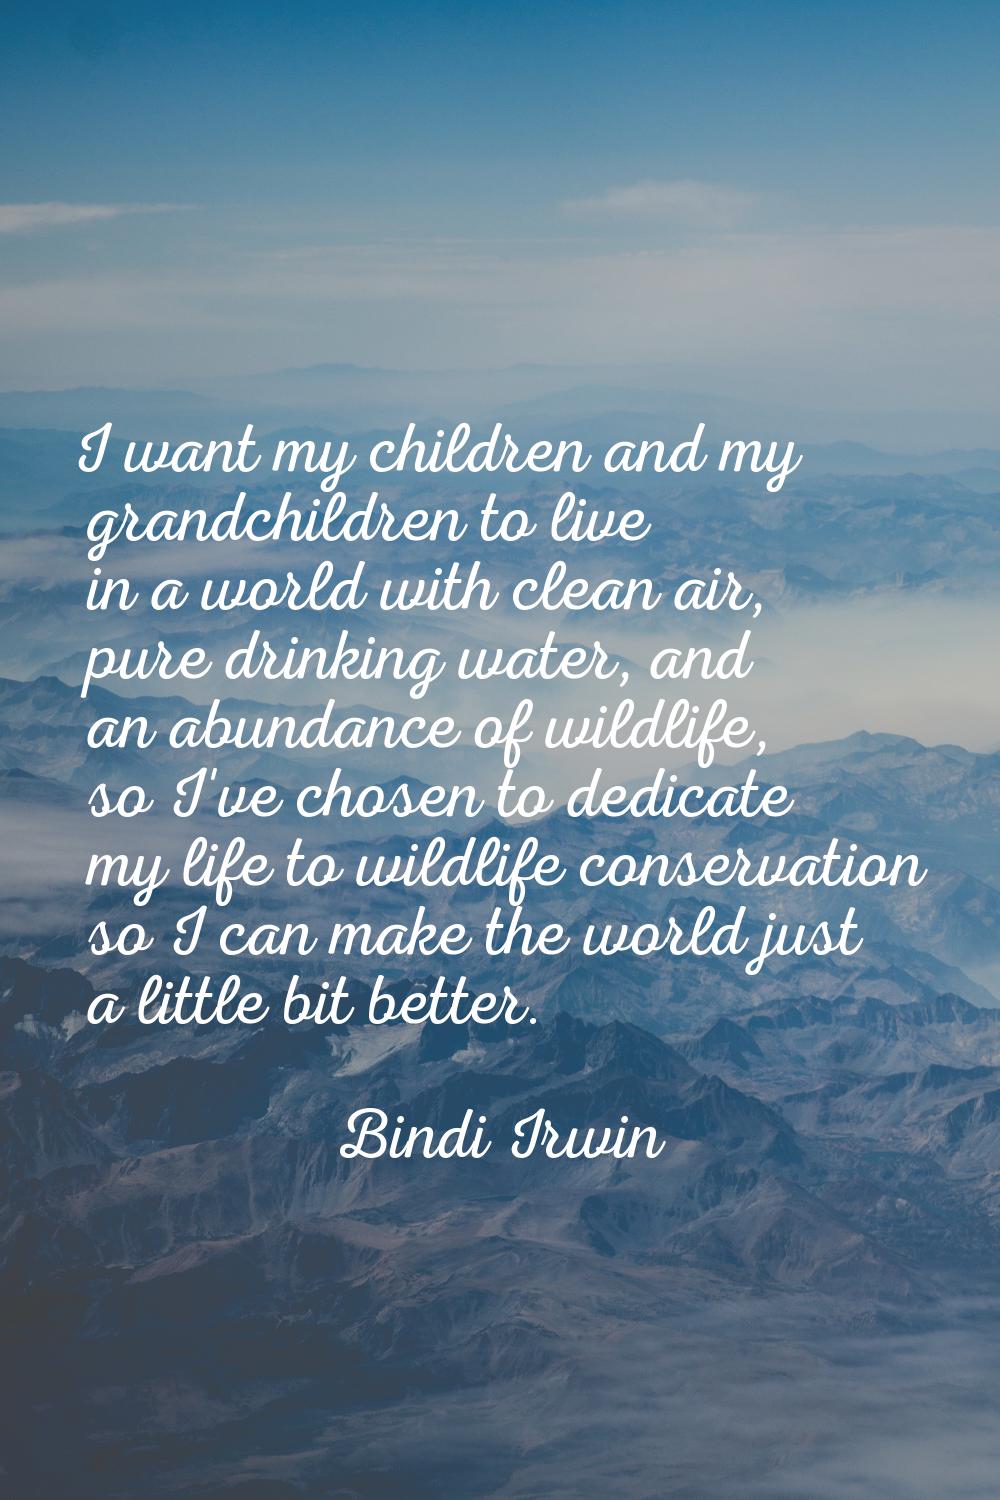 I want my children and my grandchildren to live in a world with clean air, pure drinking water, and